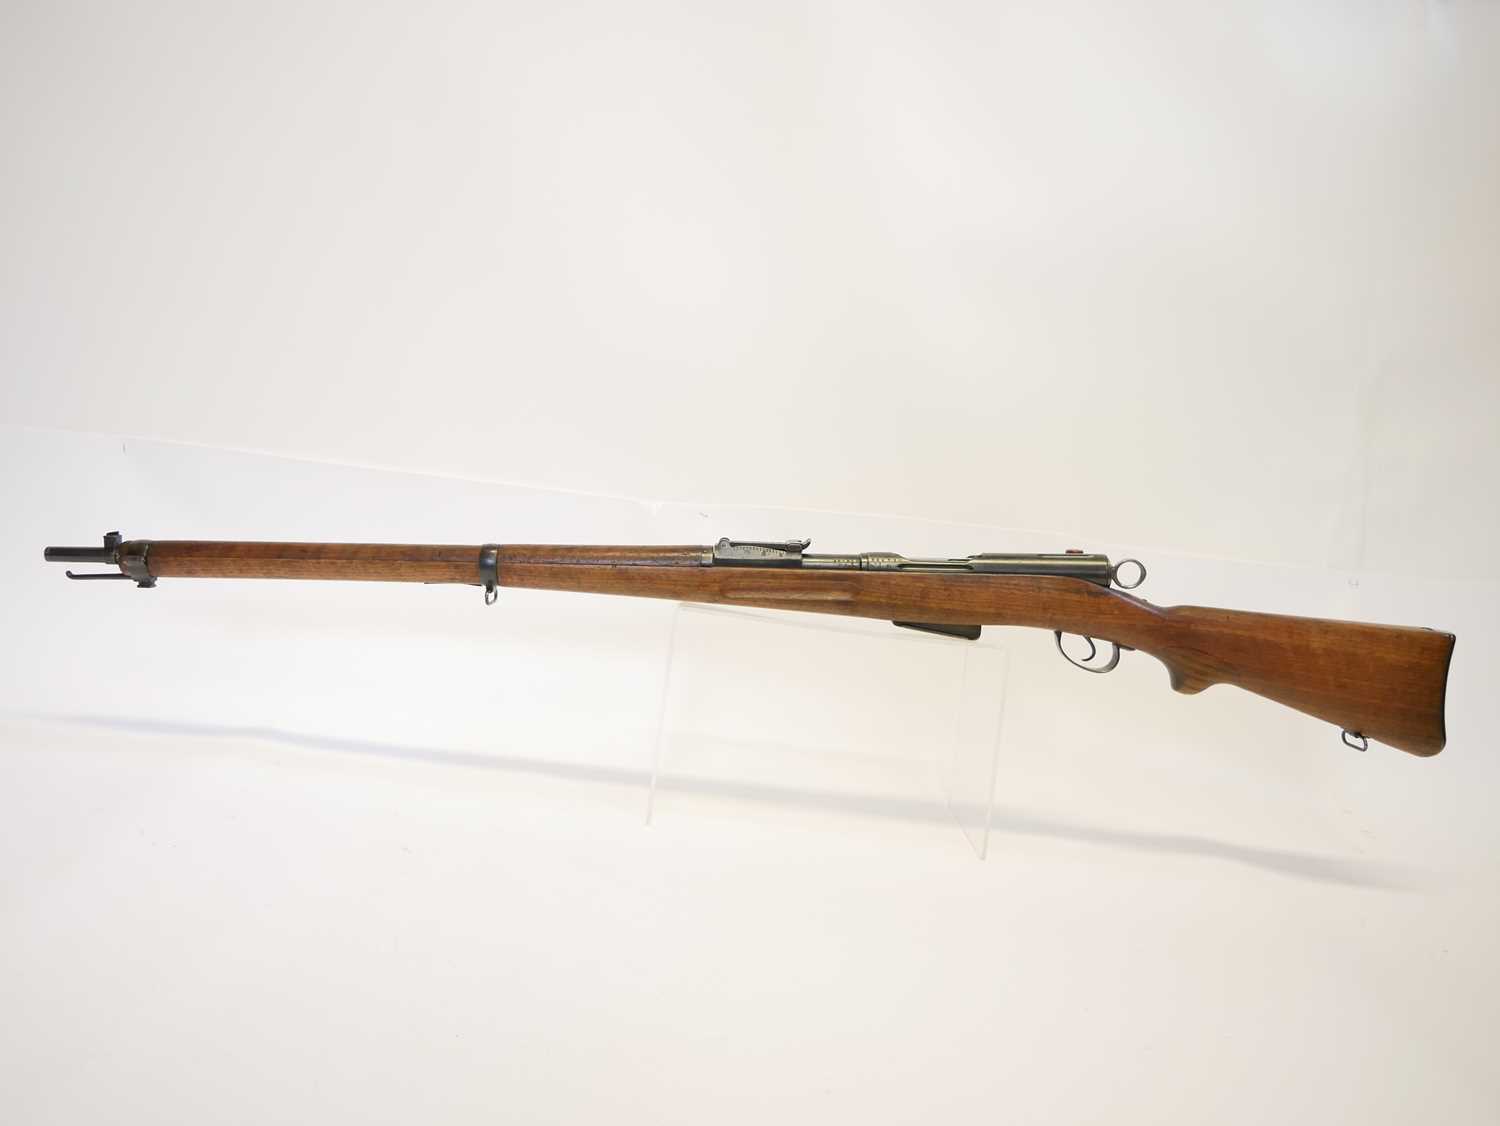 Schmidt Rubin 1896 7.5mm straight pull rifle, matching serial numbers 268510 to barrel, receiver, - Image 15 of 15